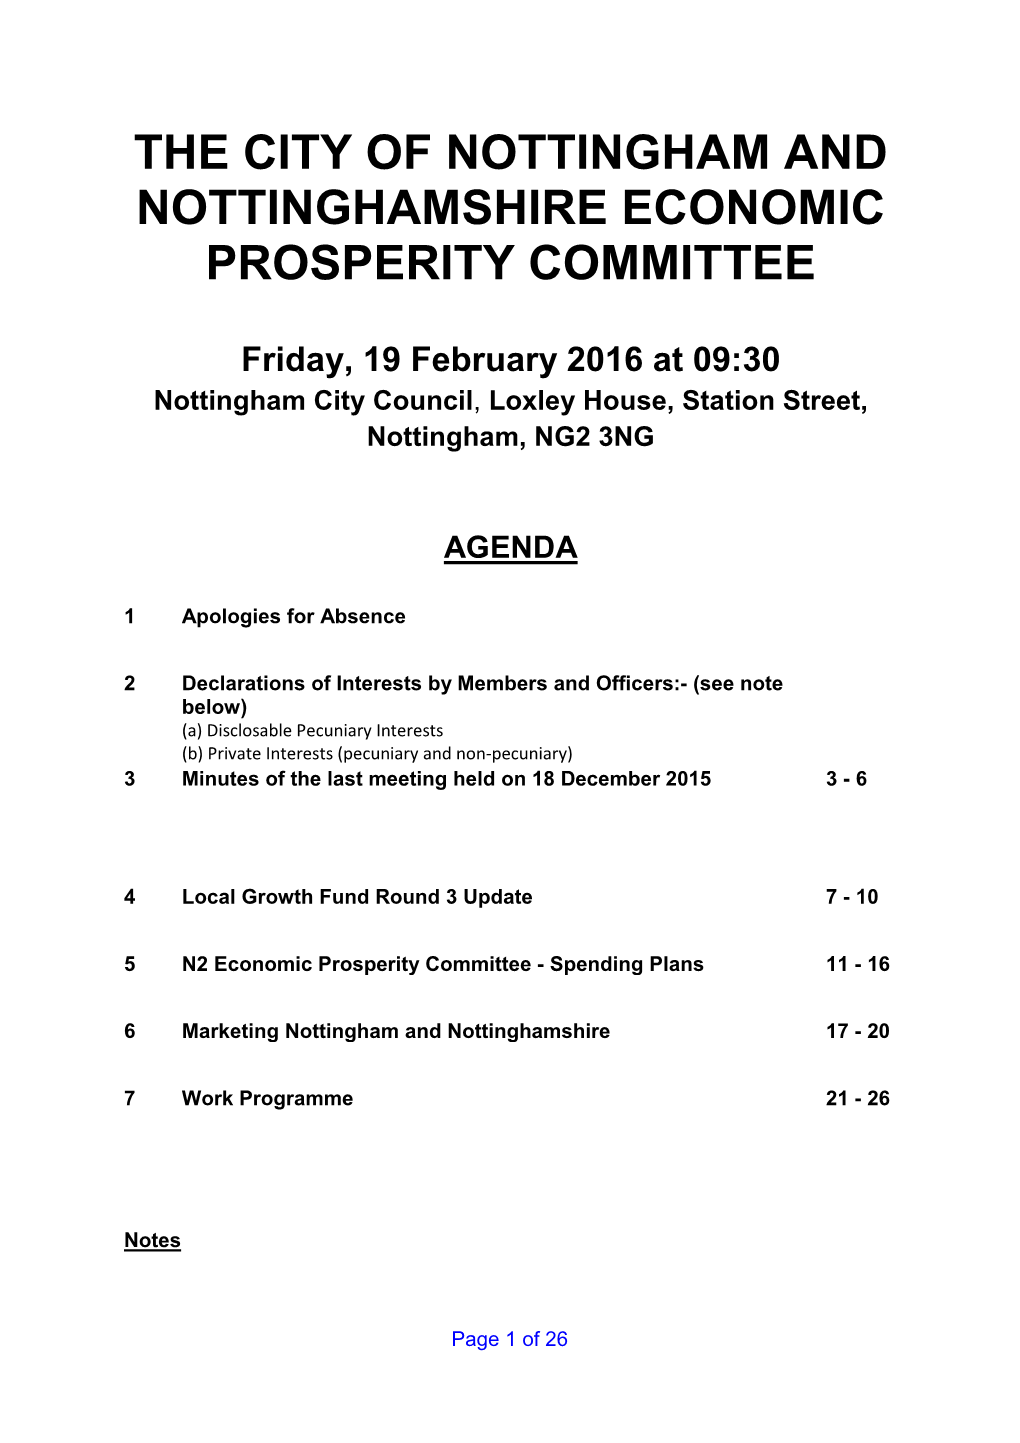 The City of Nottingham and Nottinghamshire Economic Prosperity Committee